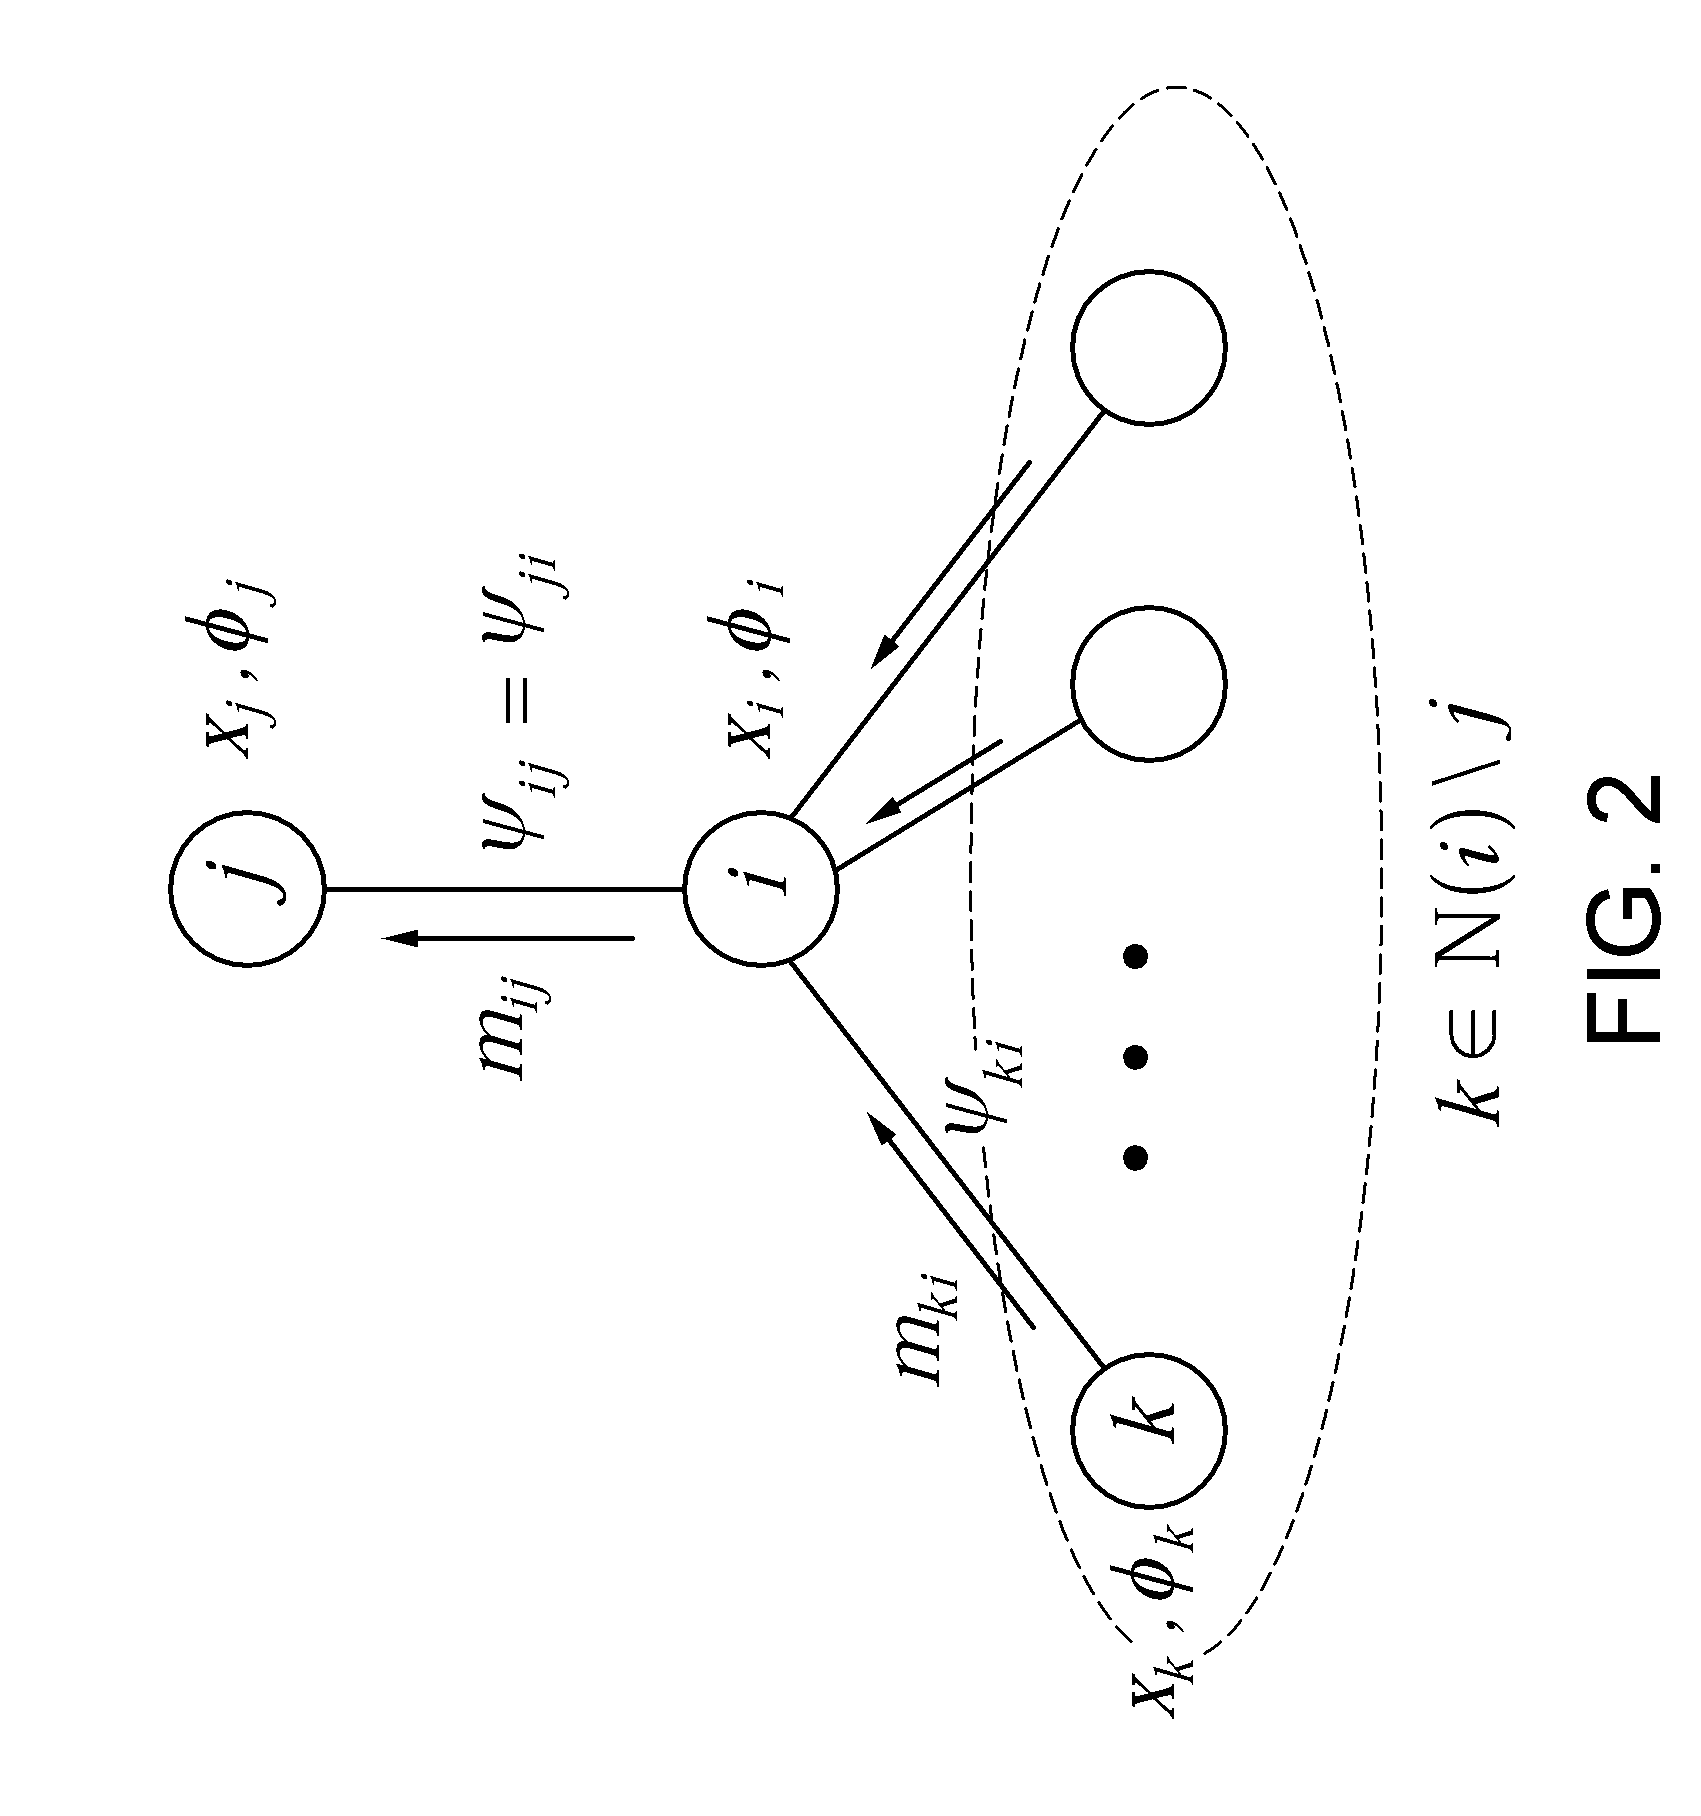 Method and system for linear processing of an input using Gaussian Belief Propagation